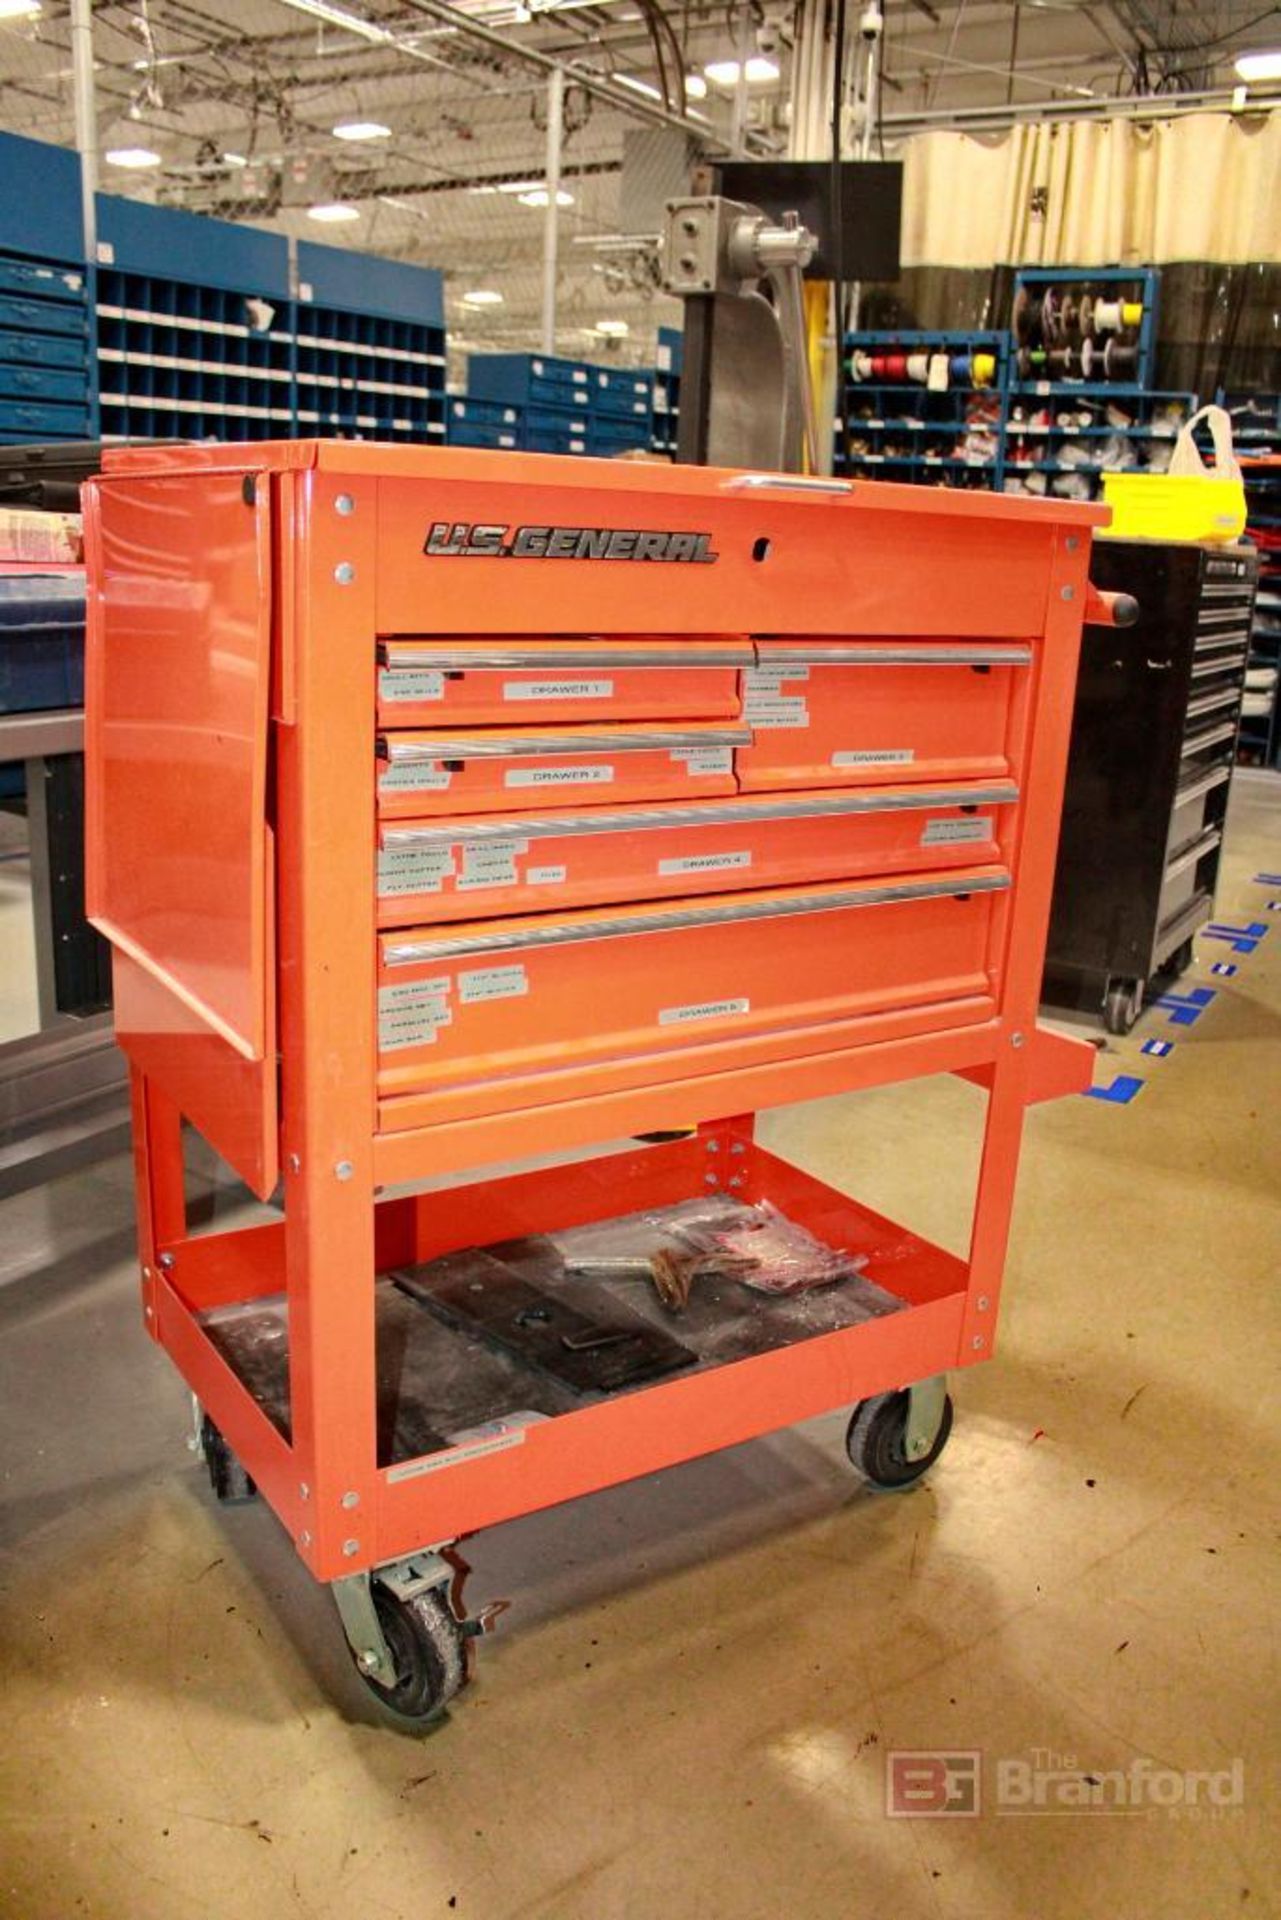 U.S.General Rolling Tool Cart with Content